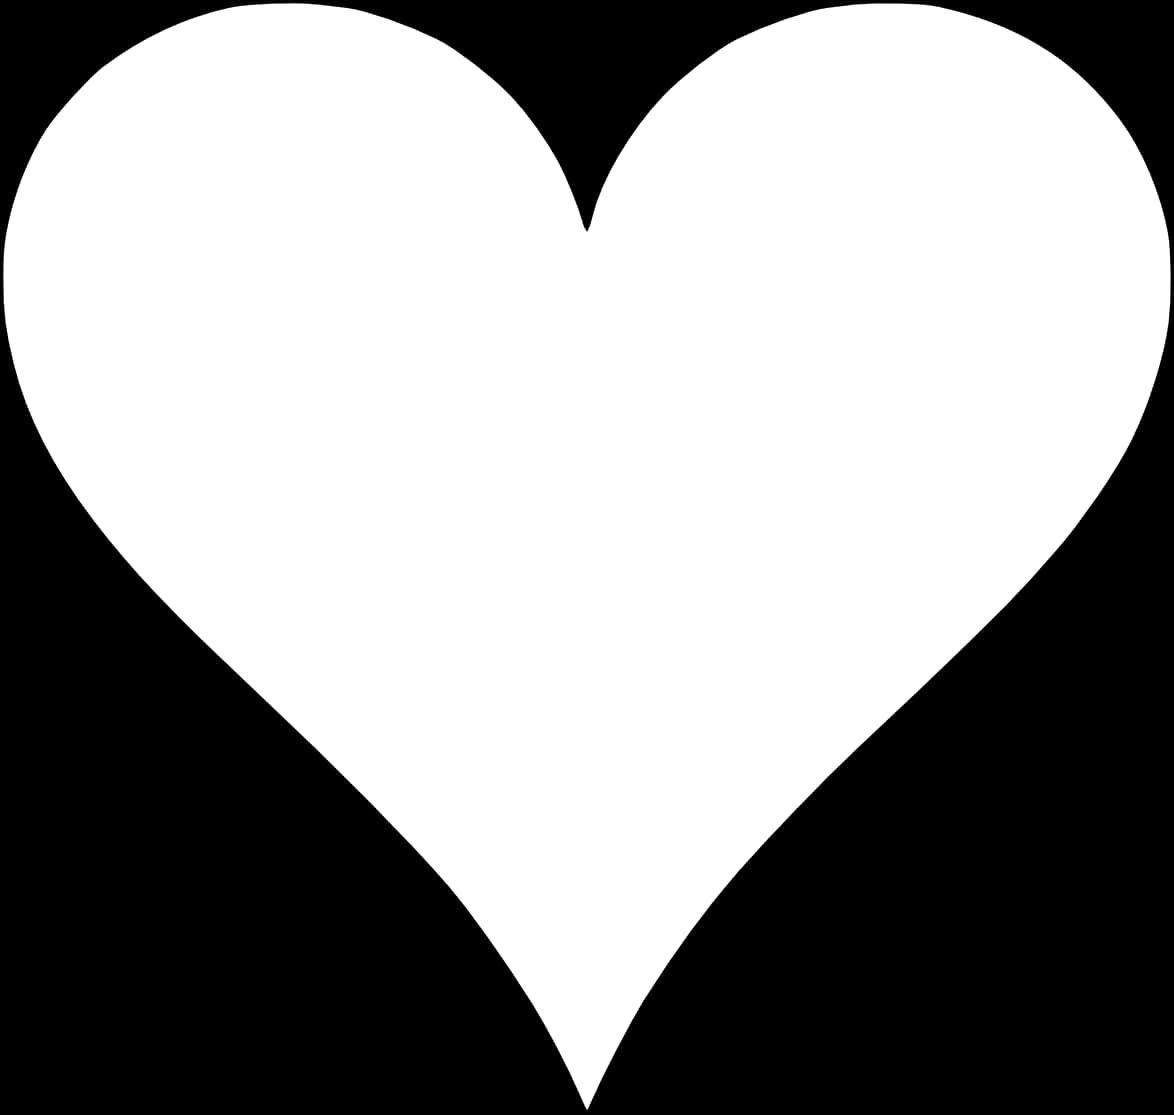 A White Heart On A Black Background